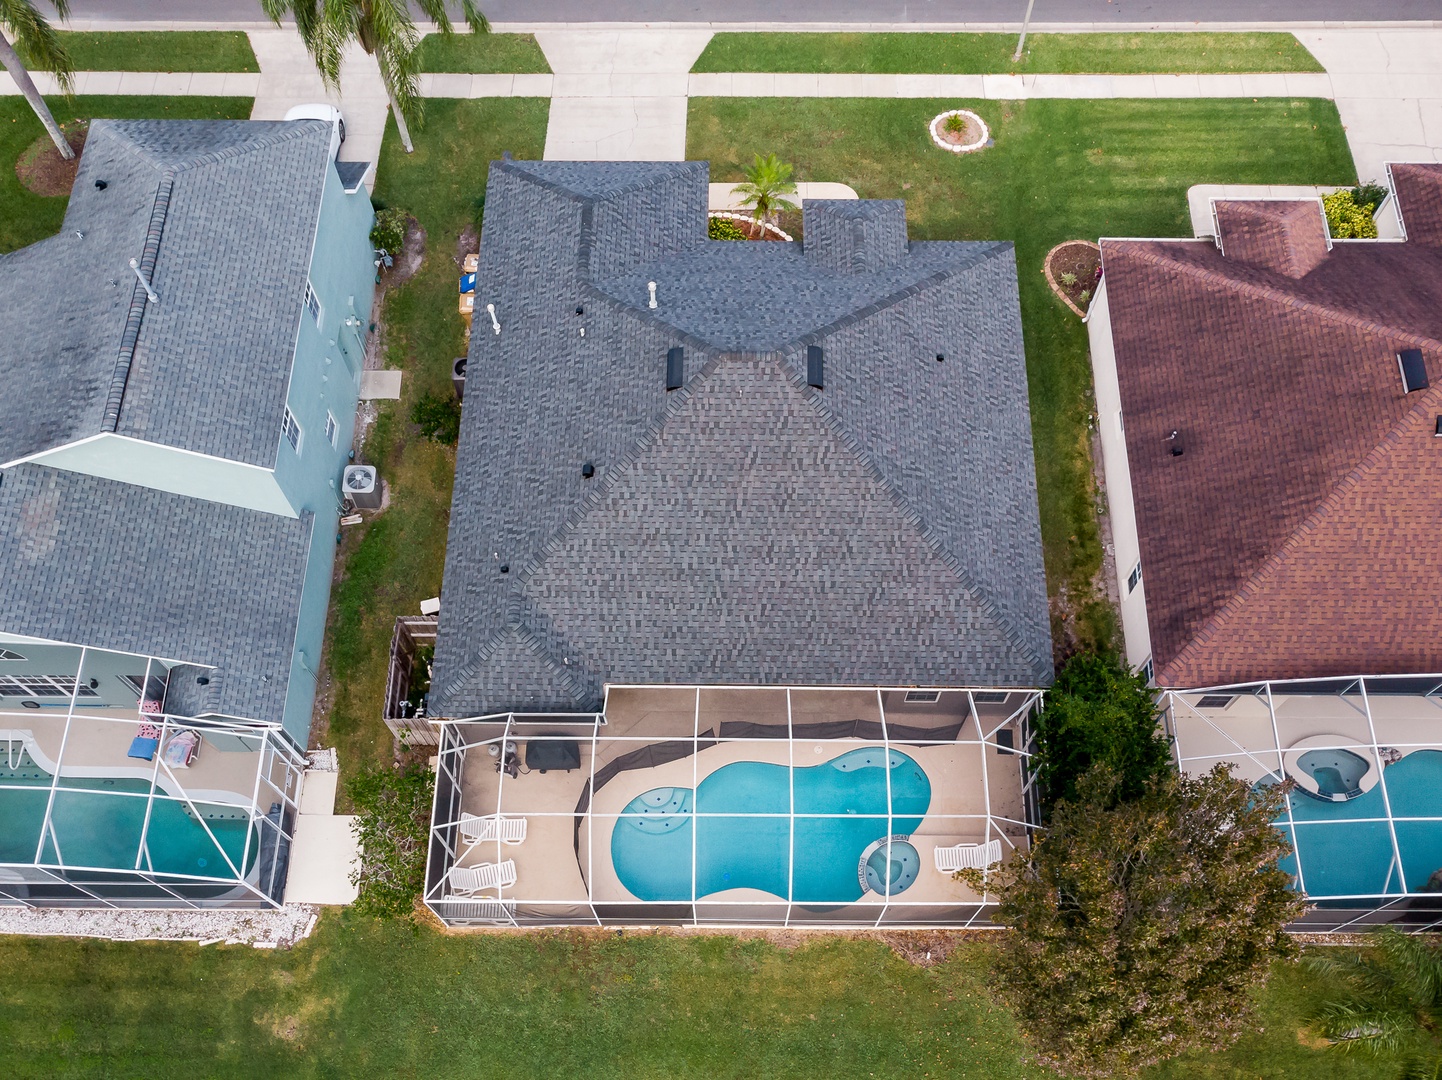 Aerial view of the home. Enjoy your next relaxing vacation here!